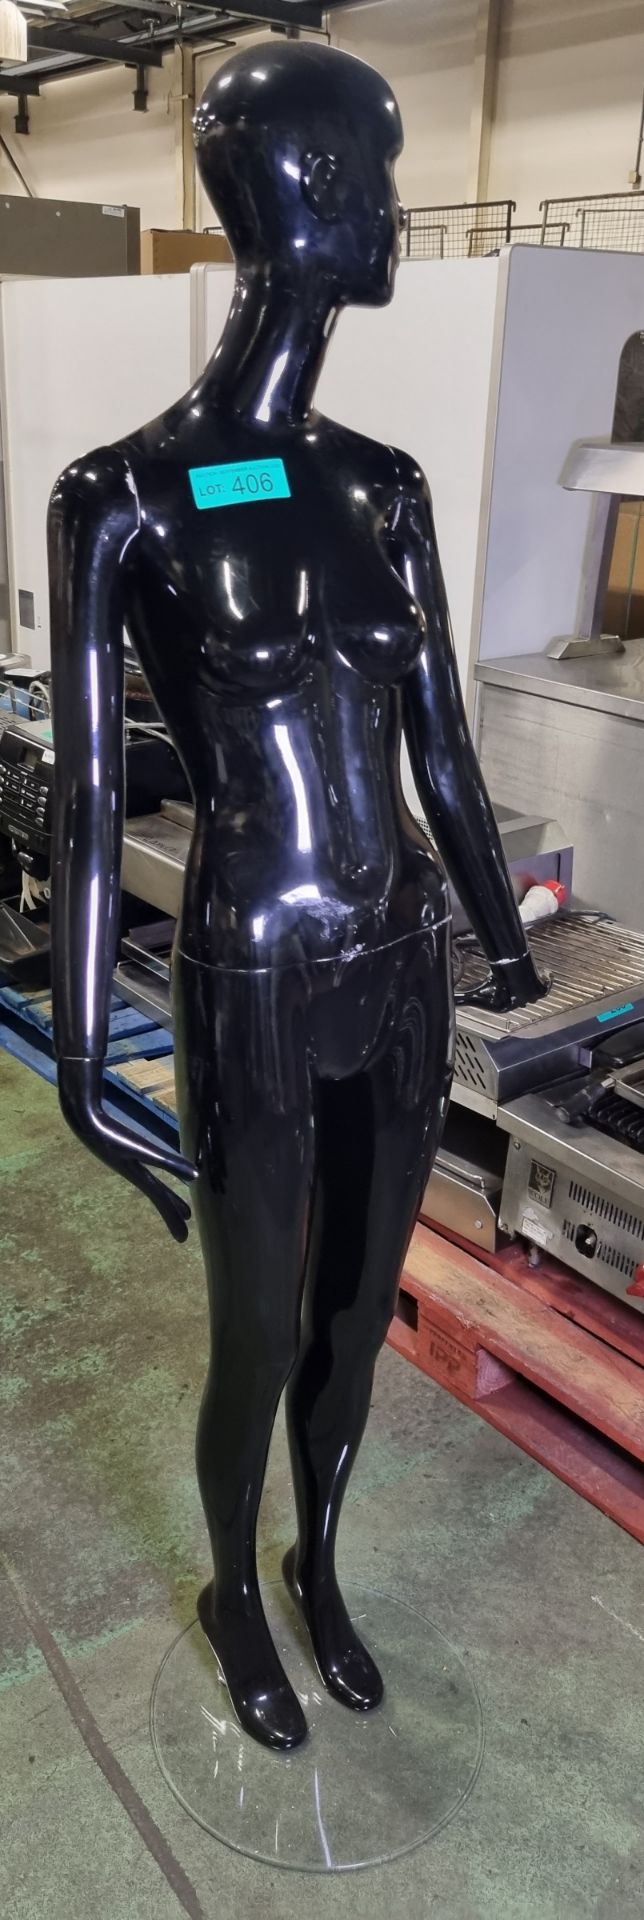 Mannequin - standing female - Image 2 of 4